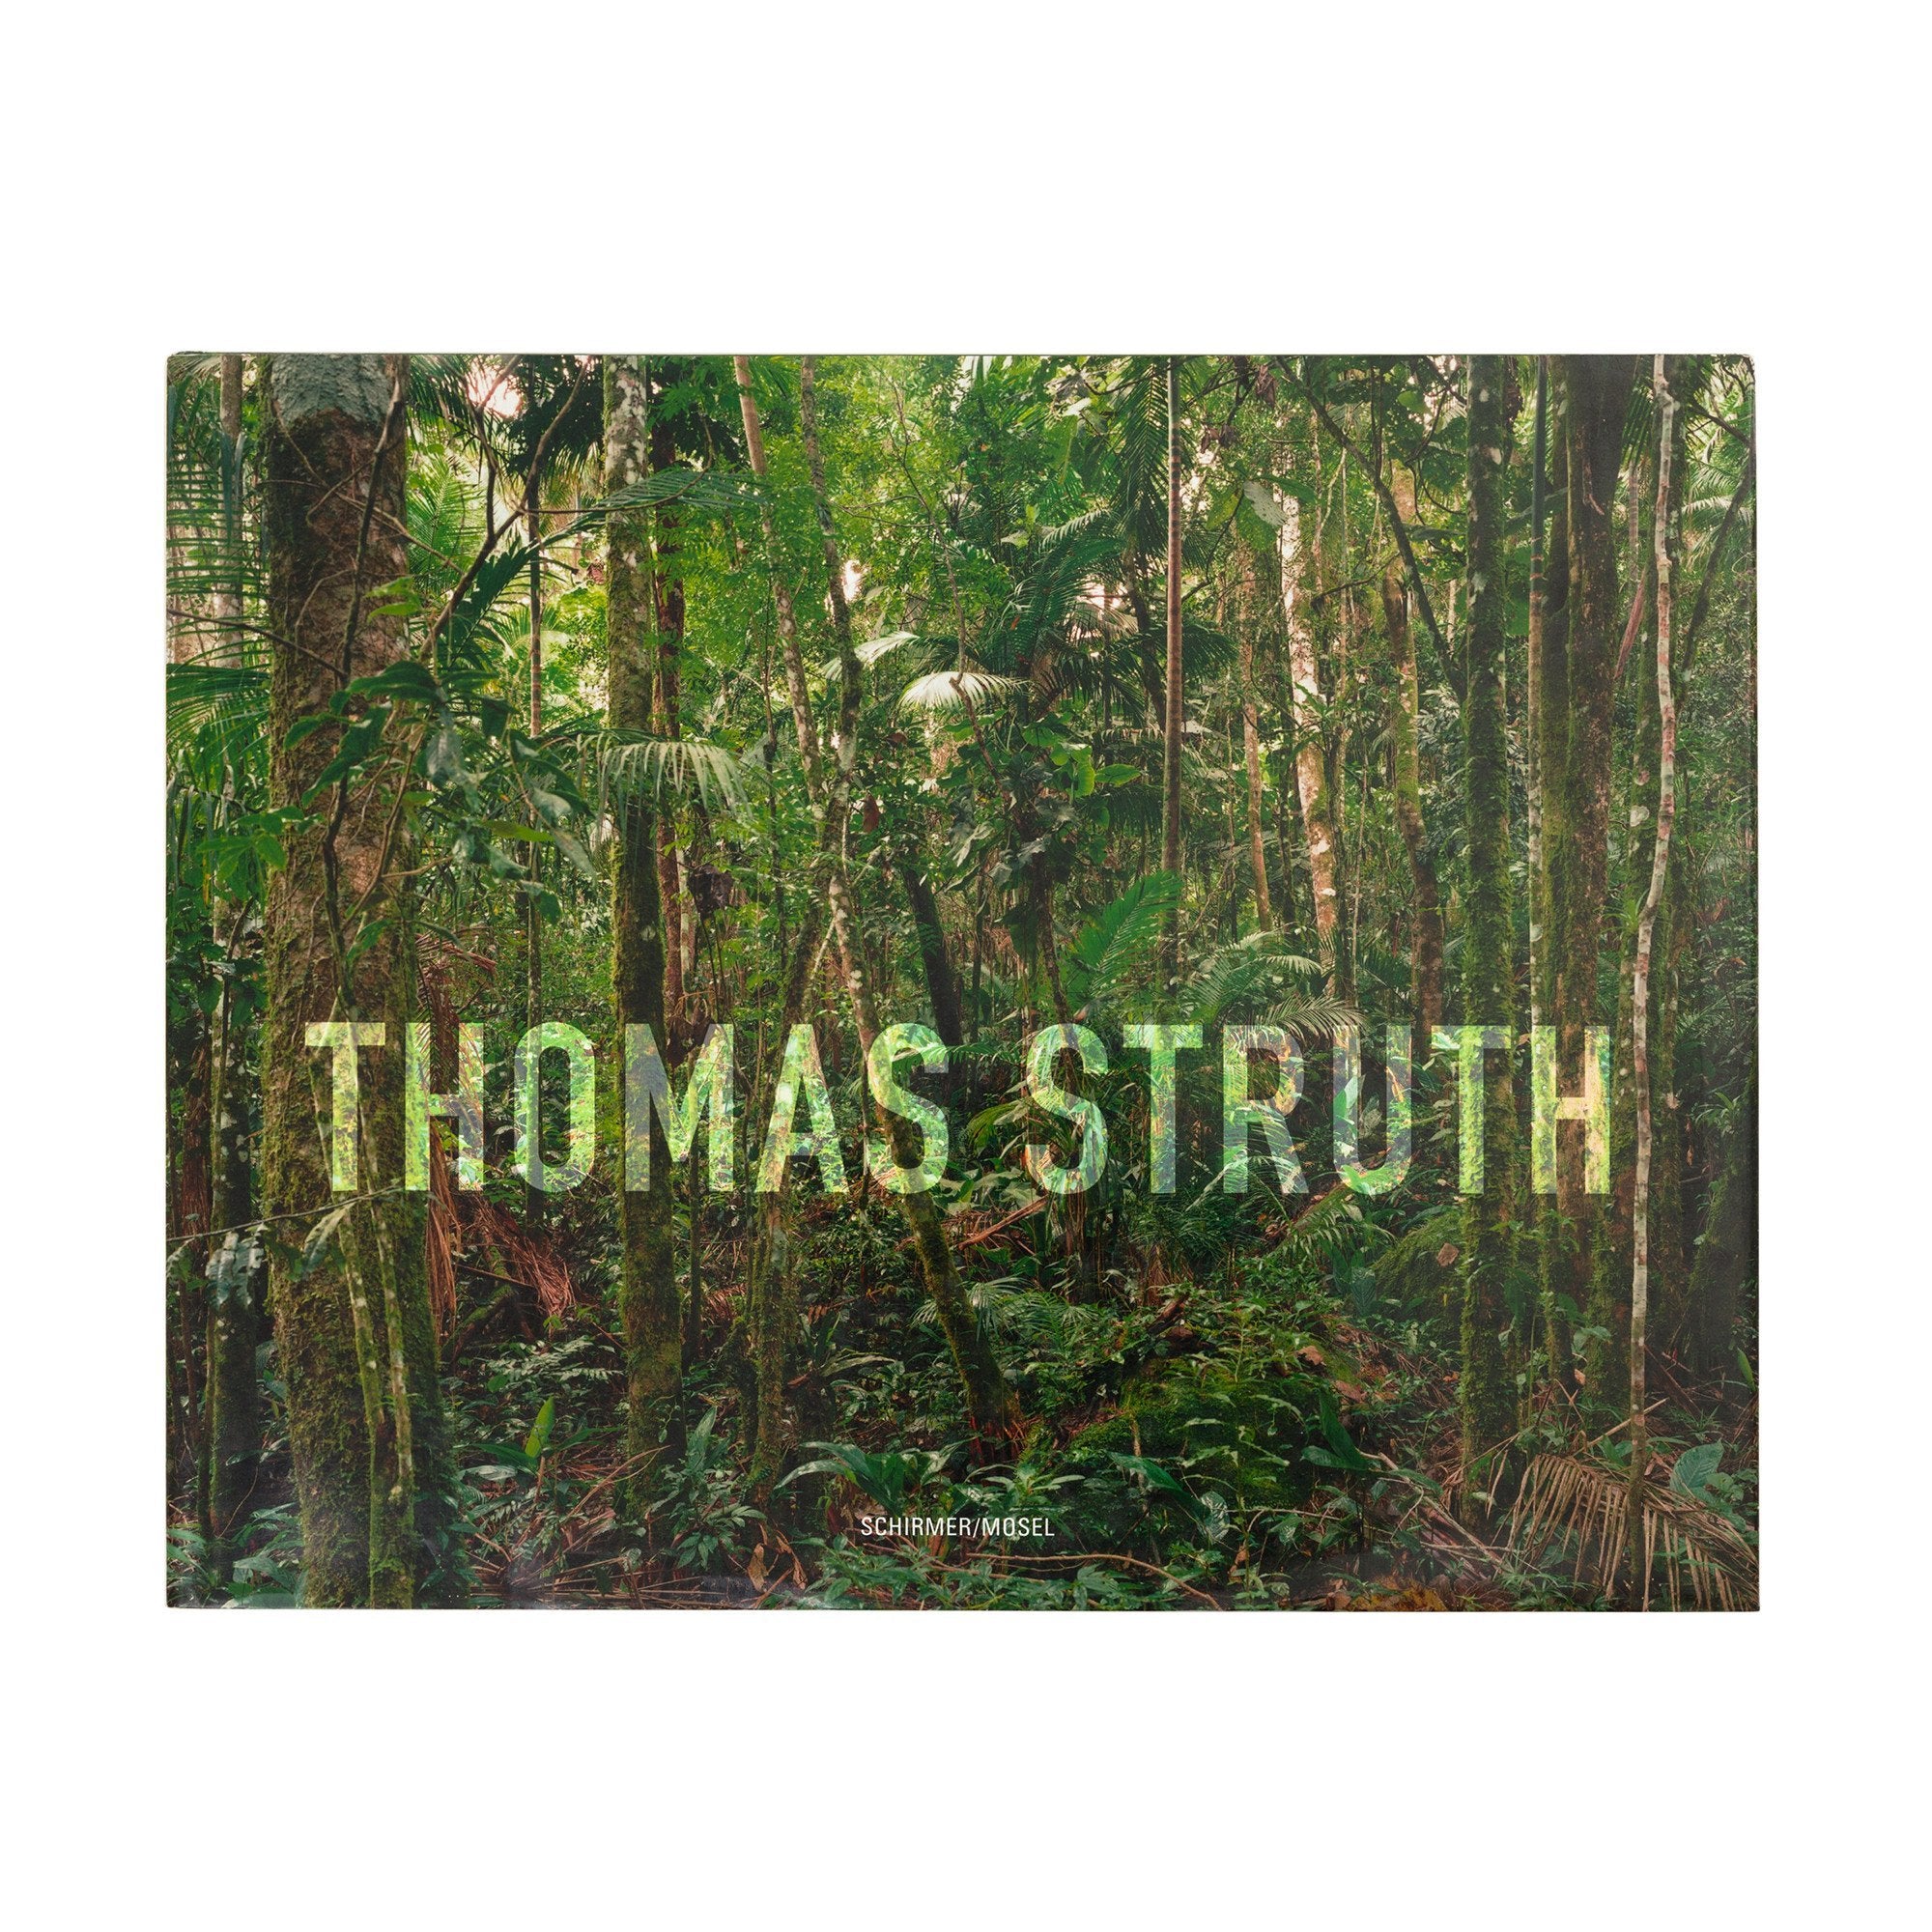 Thomas Struth, New Pictures from Paradise, 2002 - ONEROOM